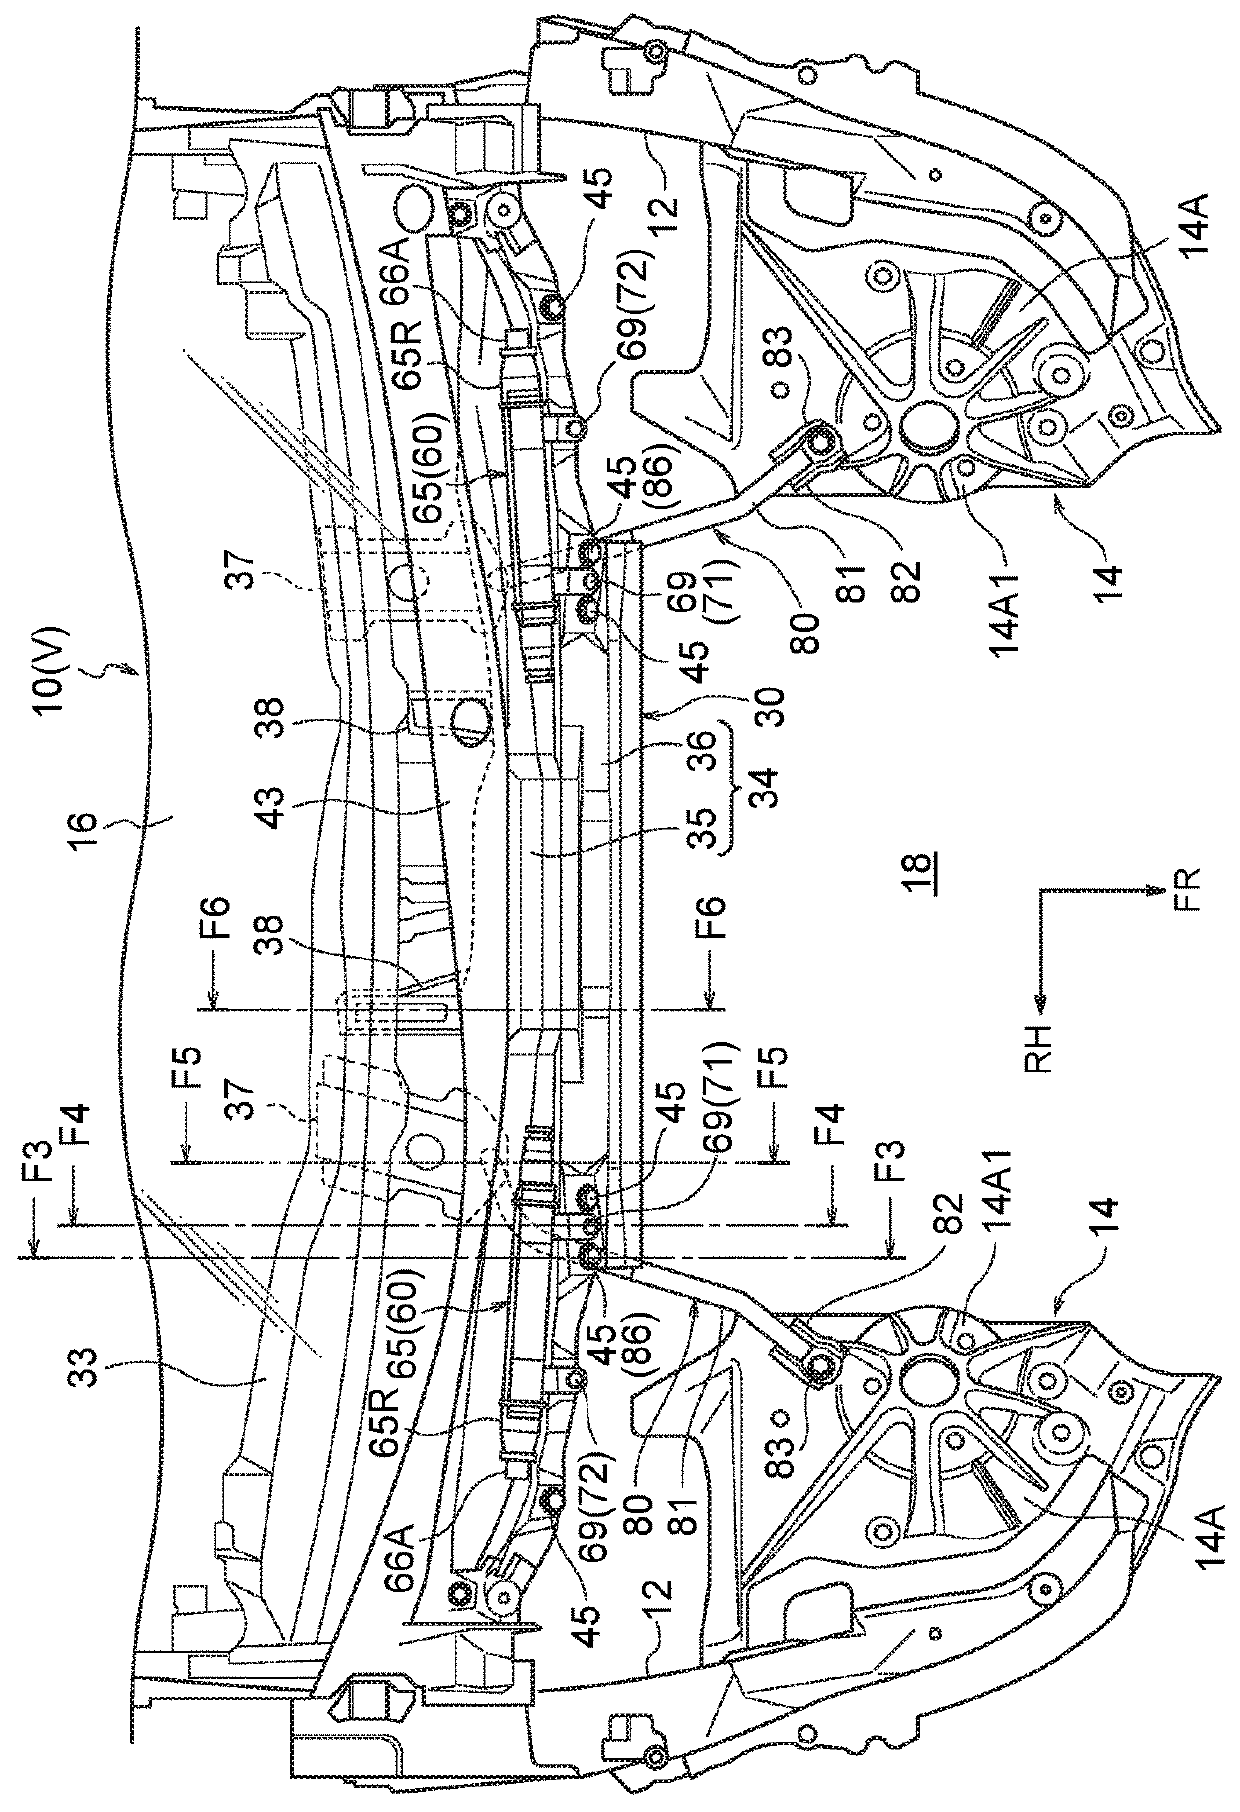 Vehicle front portion structure equipped with pedestrian airbag device